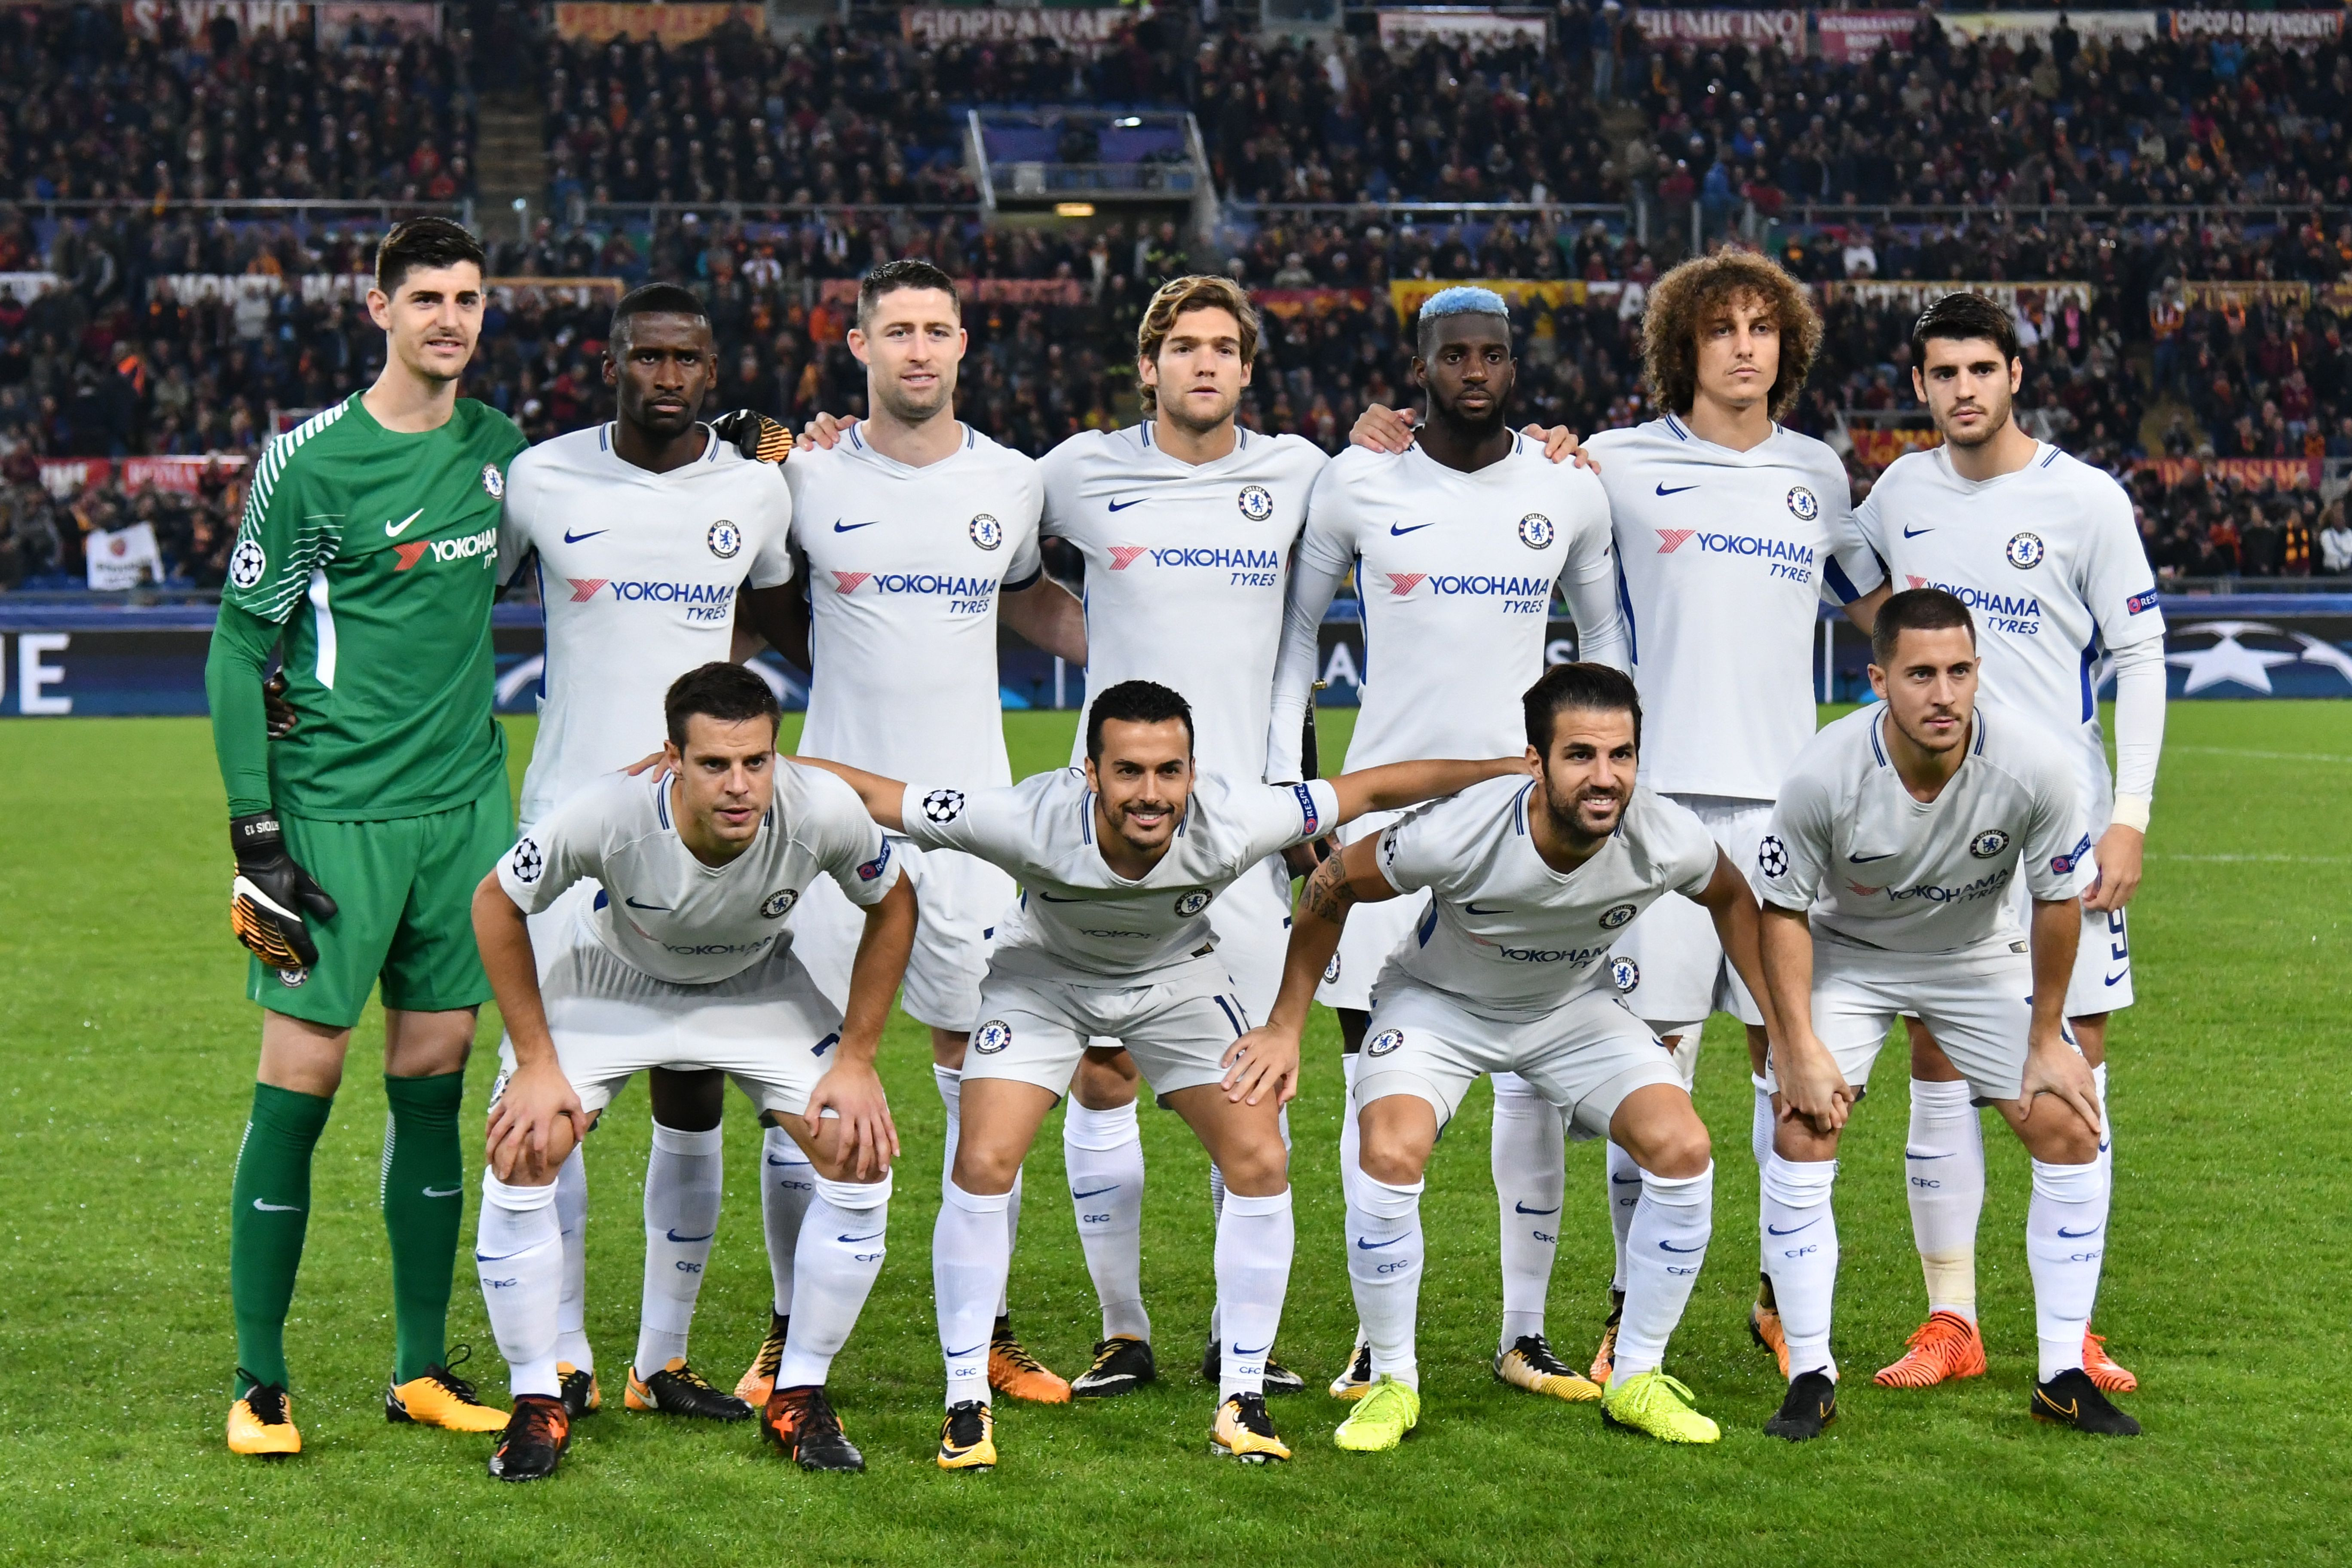 Chelsea's team players (from top left) Chelsea's Belgian goalkeeper Thibaut Courtois, Chelsea's German defender Antonio Rudiger, Chelsea's English defender Gary Cahill, Chelsea's Spanish defender Marcos Alonso, Chelsea's French midfielder Tiemoue Bakayoko, Chelsea's Brazilian defender David Luiz, Chelsea's Spanish striker Alvaro Morata, Chelsea's Spanish defender Cesar Azpilicueta, Chelsea's Spanish midfielder Pedro, Chelsea's Spanish midfielder Cesc Fabregas and Chelsea's Belgian midfielder Eden Hazard pose before the UEFA Champions League football match AS Roma vs Chelsea on October 31, 2017 at the Olympic Stadium in Rome.  / AFP PHOTO / Alberto PIZZOLI        (Photo credit should read ALBERTO PIZZOLI/AFP/Getty Images)